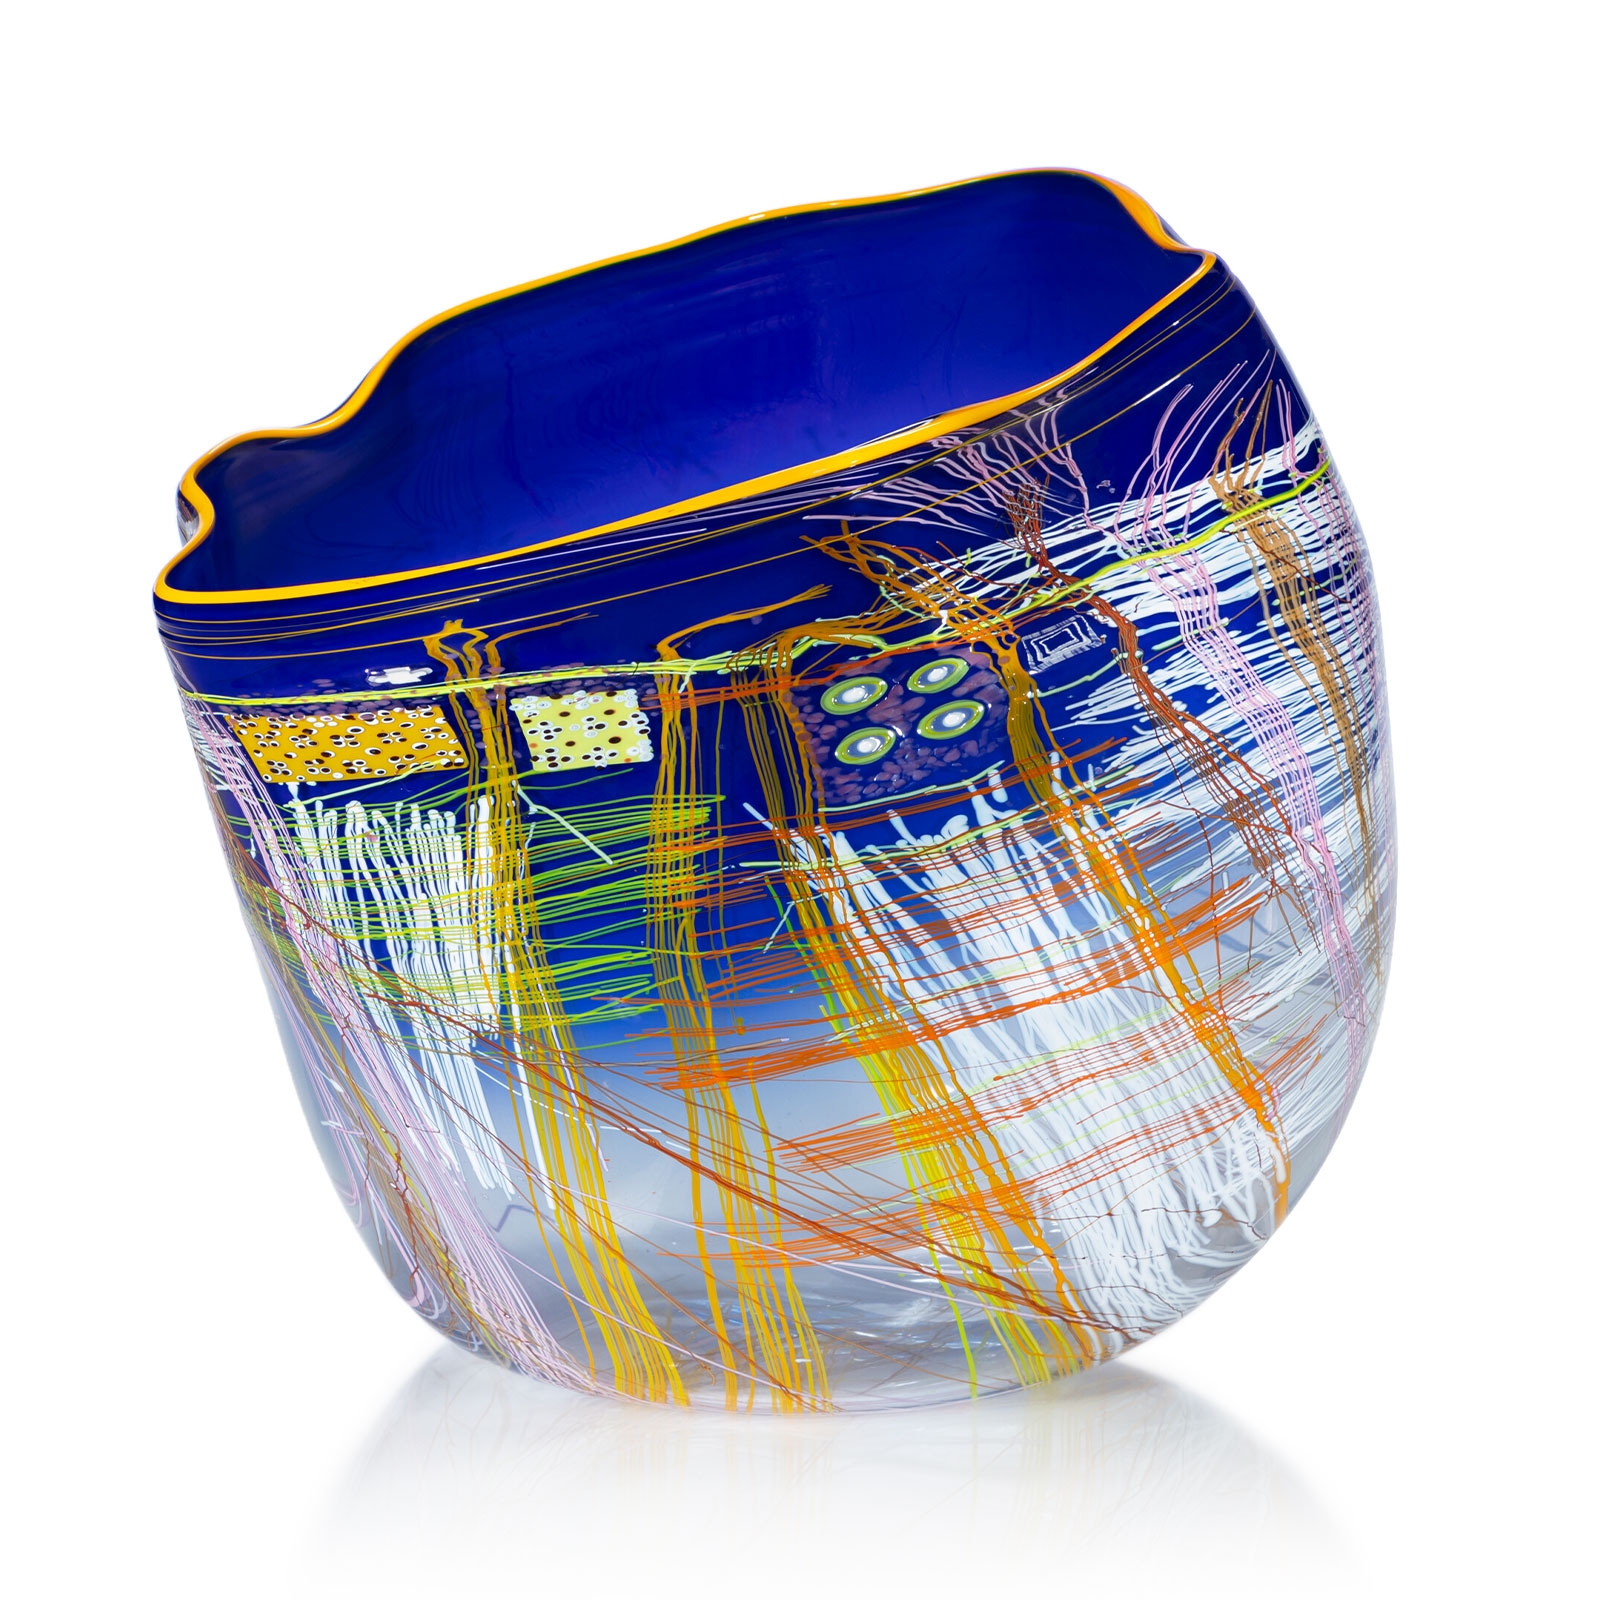 Navy Soft Cylinder with Goldenrod Lip Wrap, 2014 by Dale Chihuly